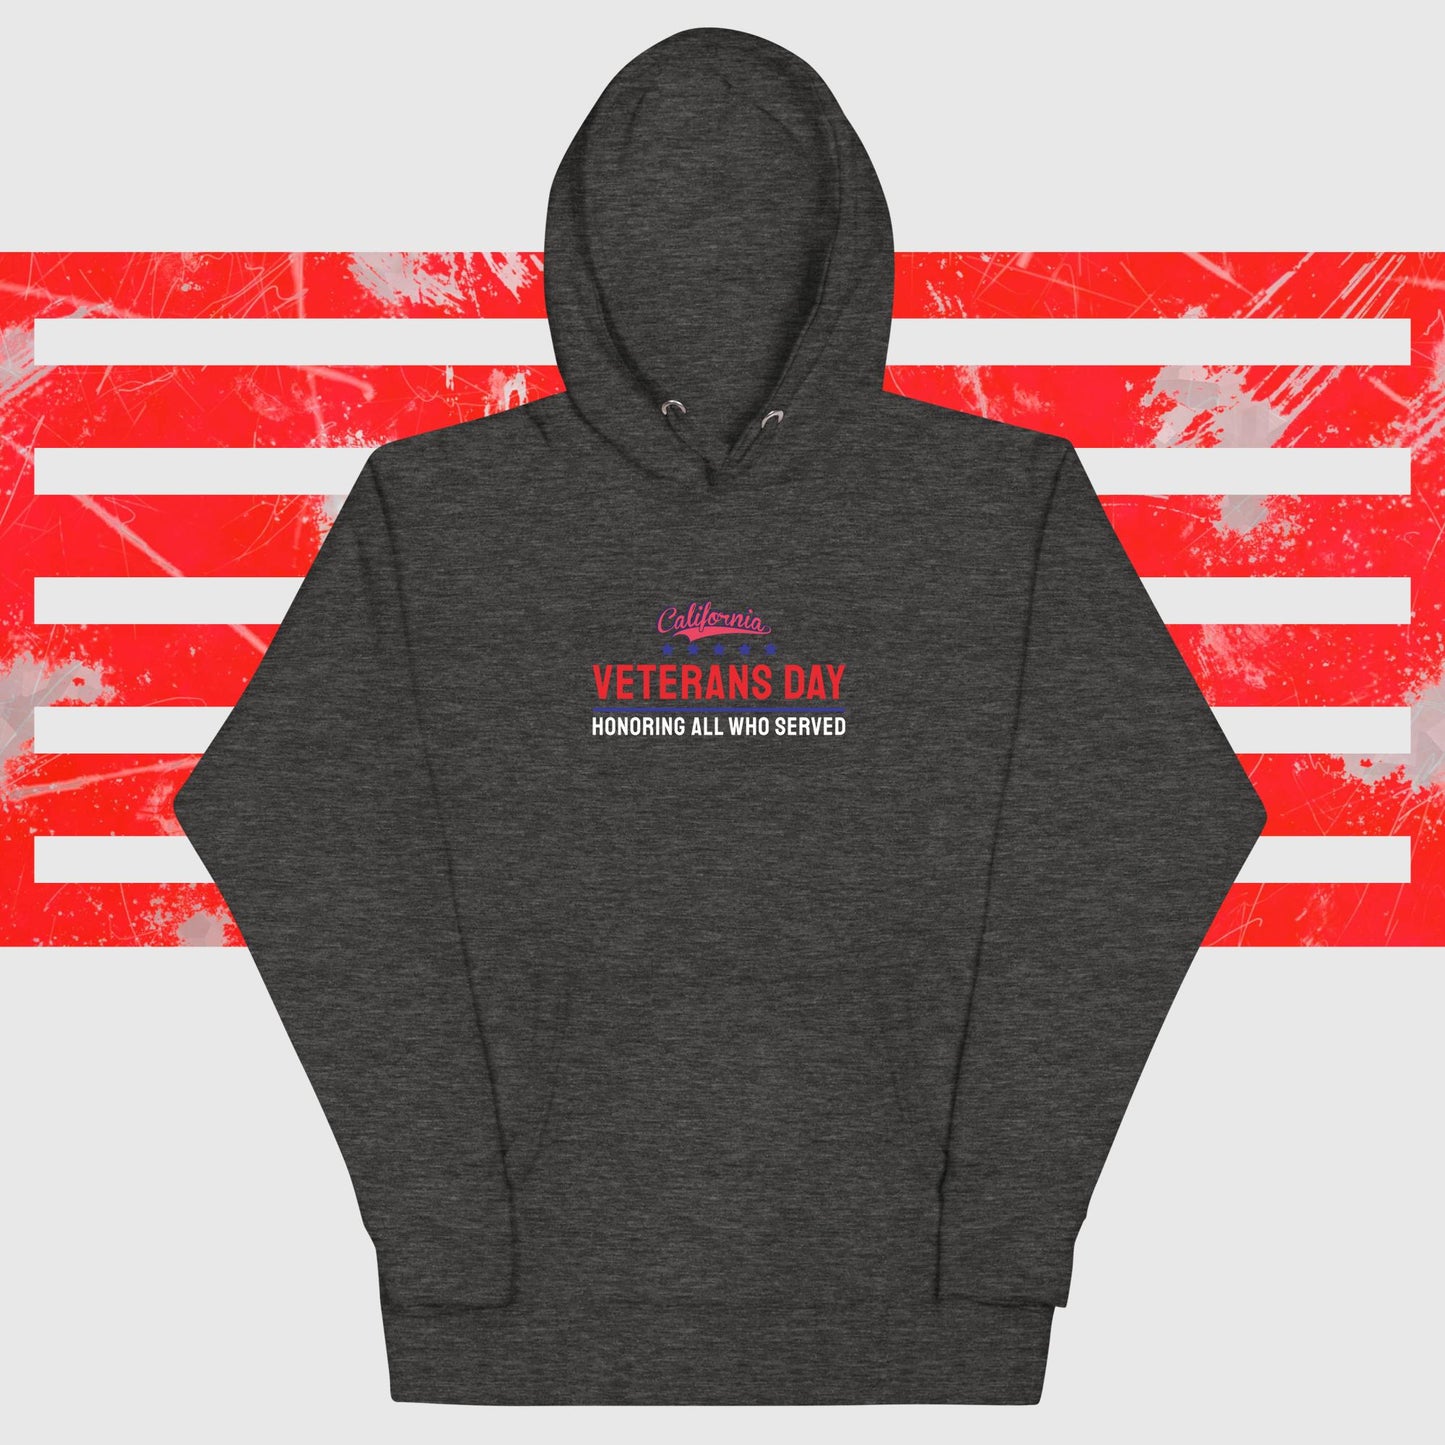 PATRIOTIC HOODIE FOR VETERANS DAY CALIFORNIA FOR PROUD AMERICAN CHARCOAL FRONT - www.firstamericanstore.com